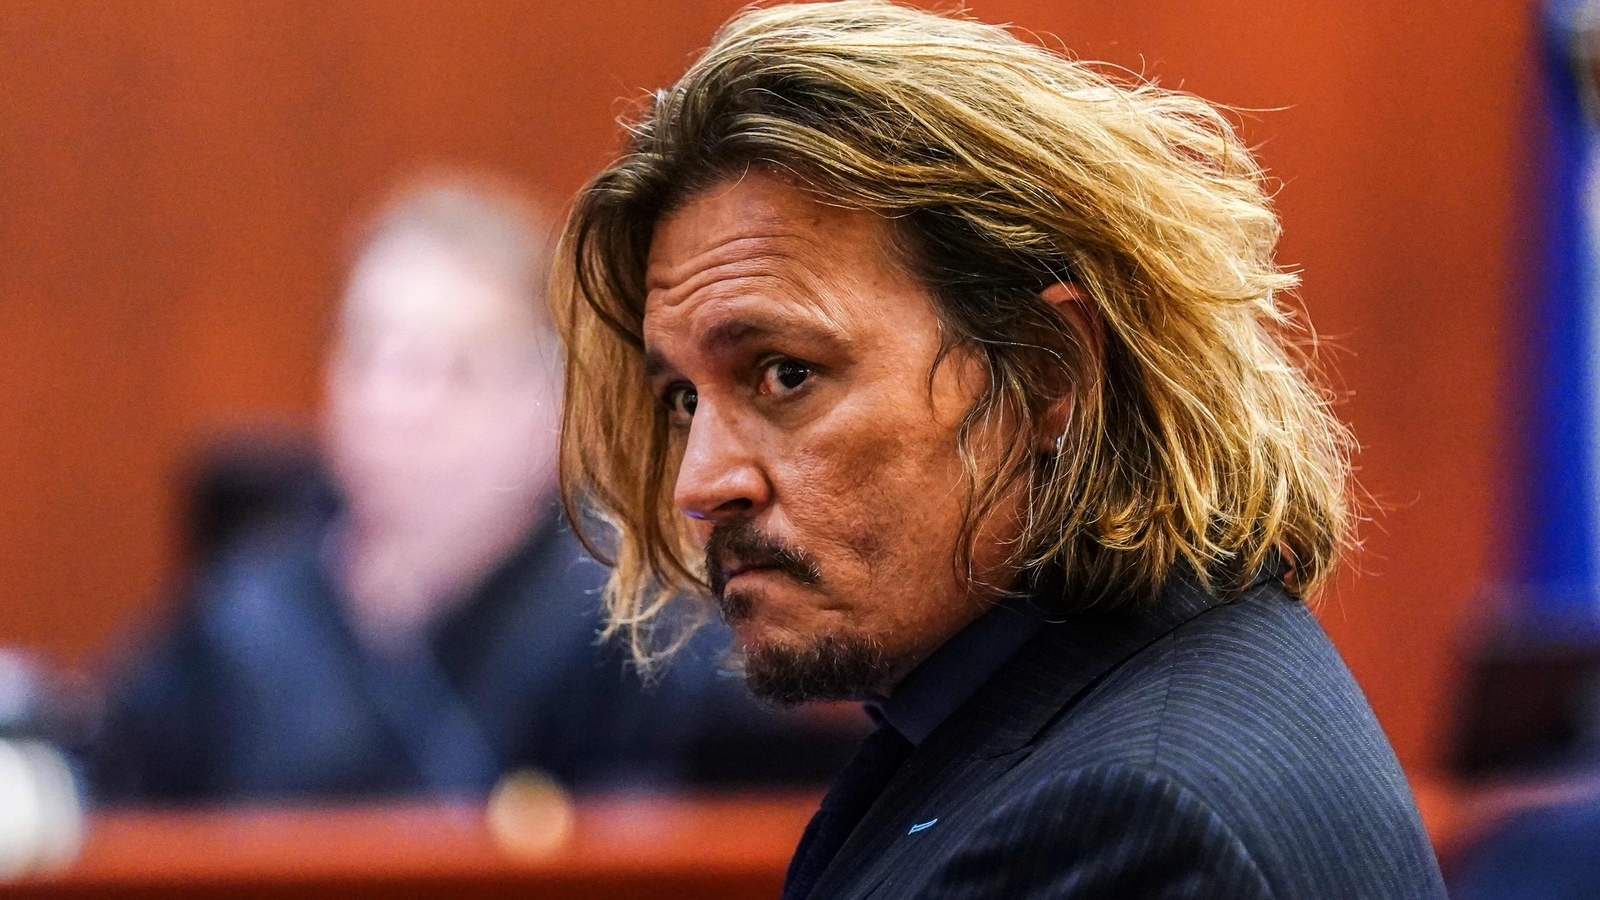 Johnny Depp hires famed attorney in battle with Amber Heard